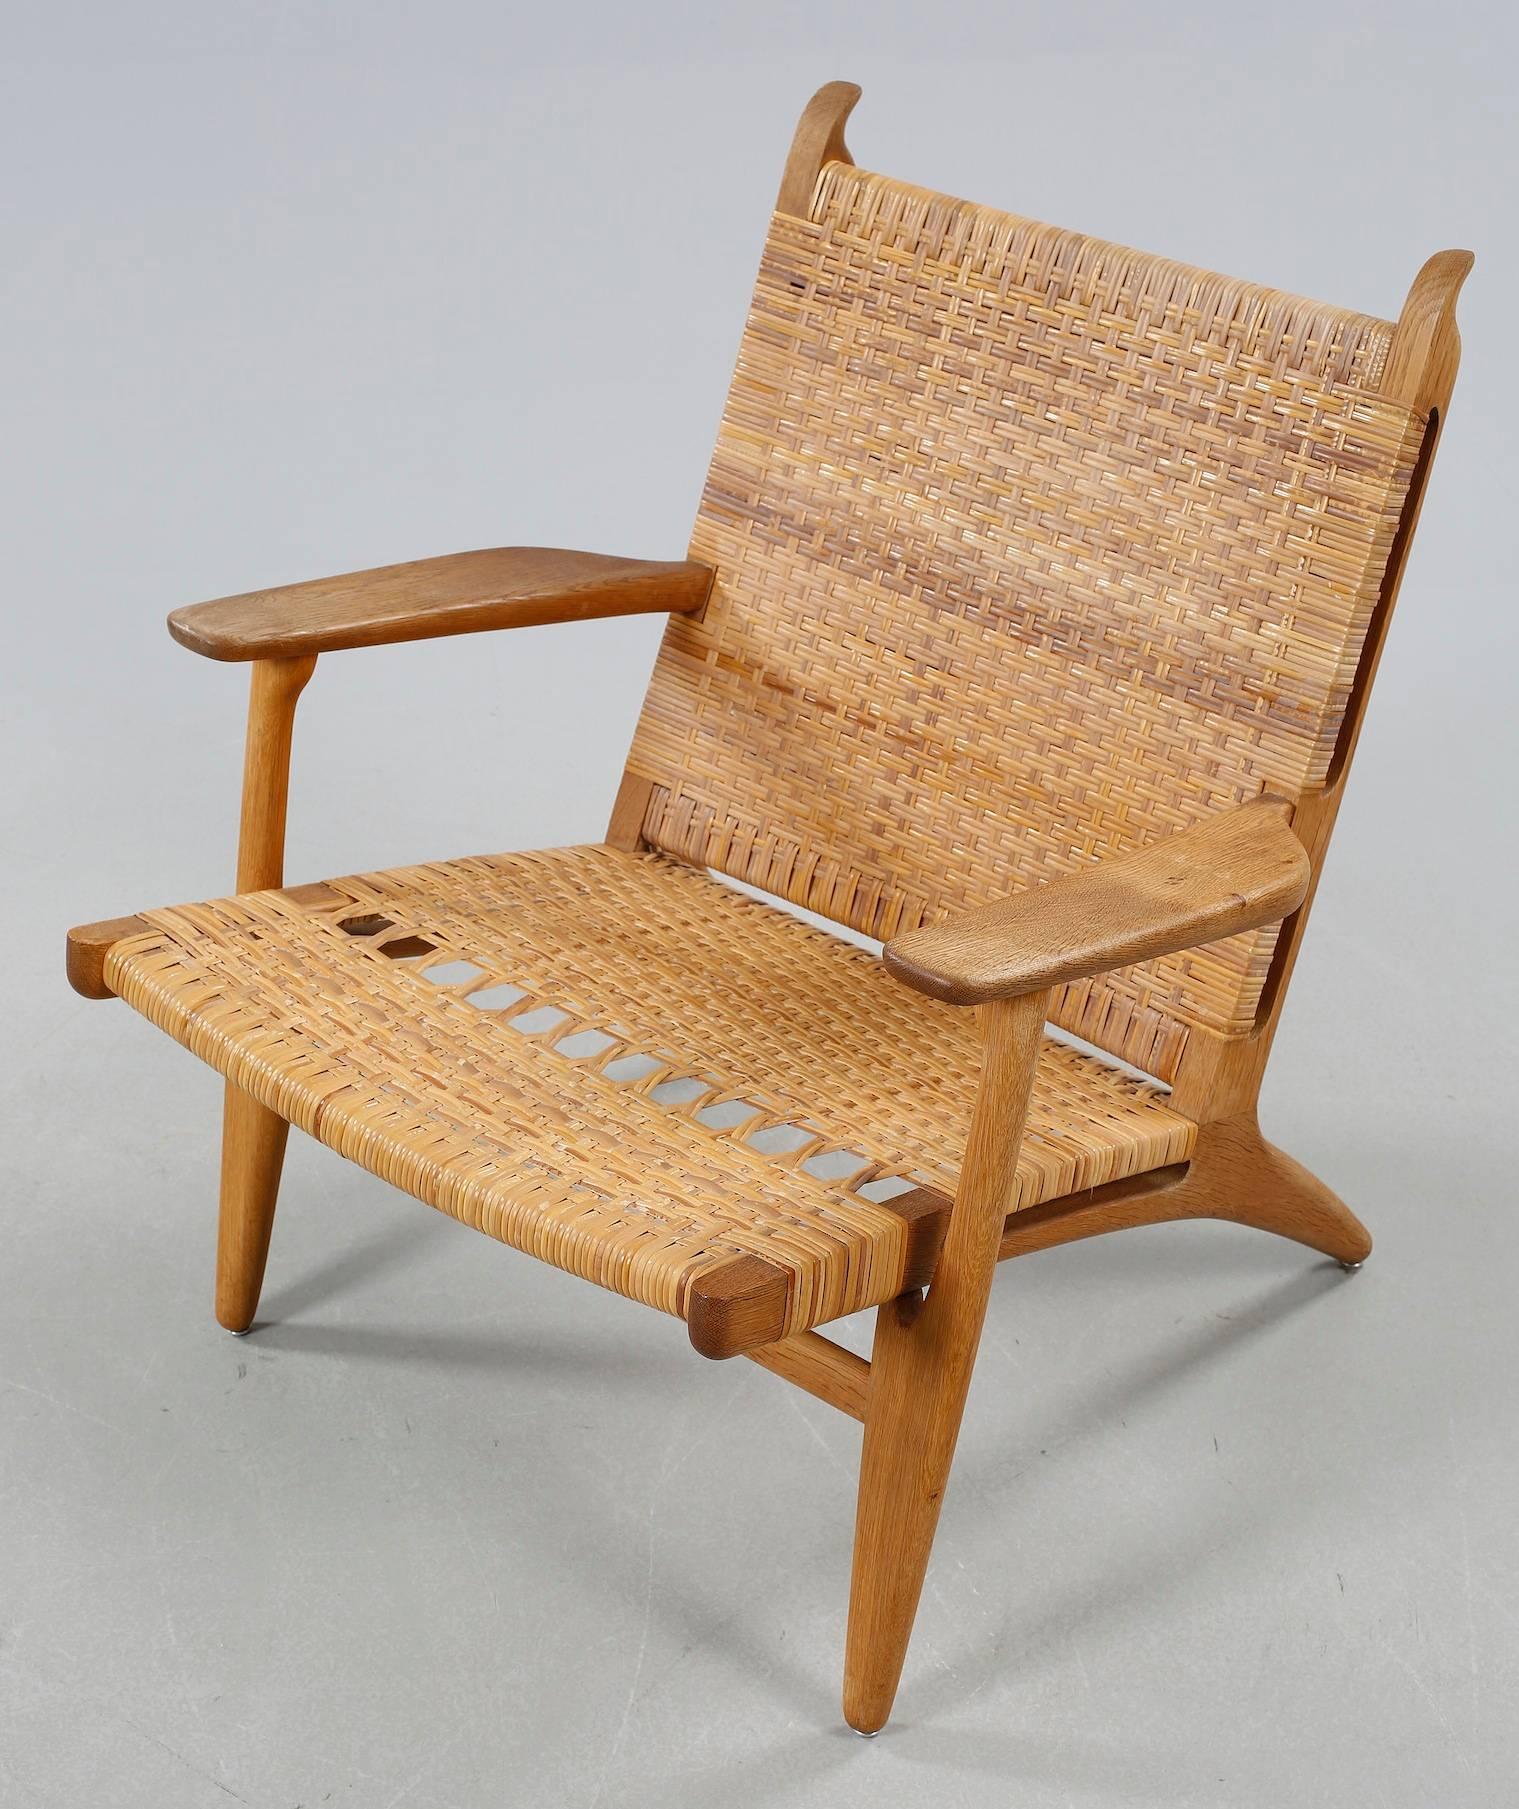 Original Hans J. Wegner CH-27 chair in oak and rattan for Carl Hansen & Son. Some repair on the rattan was done. Chair is in very good condition.